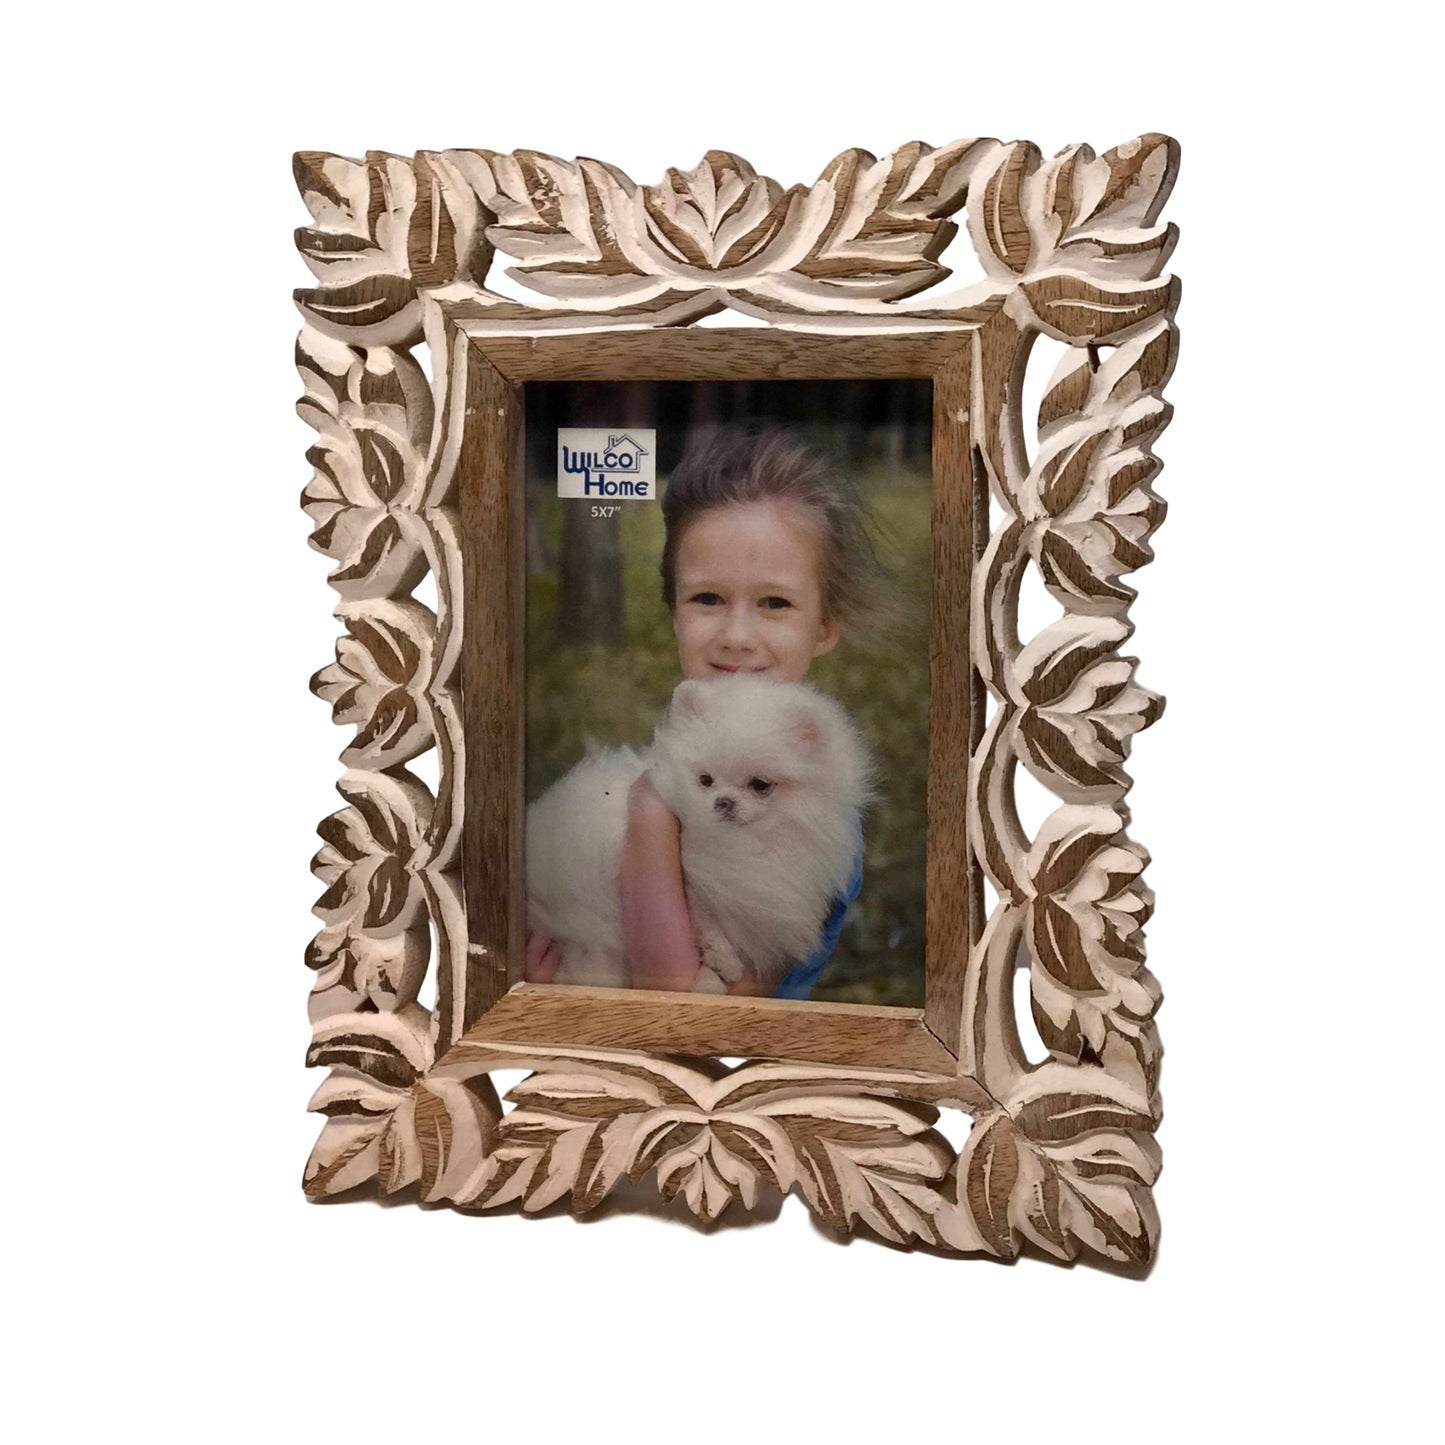 Malaga Hand-Carved Wood Photo Frame with Fold Out Stand